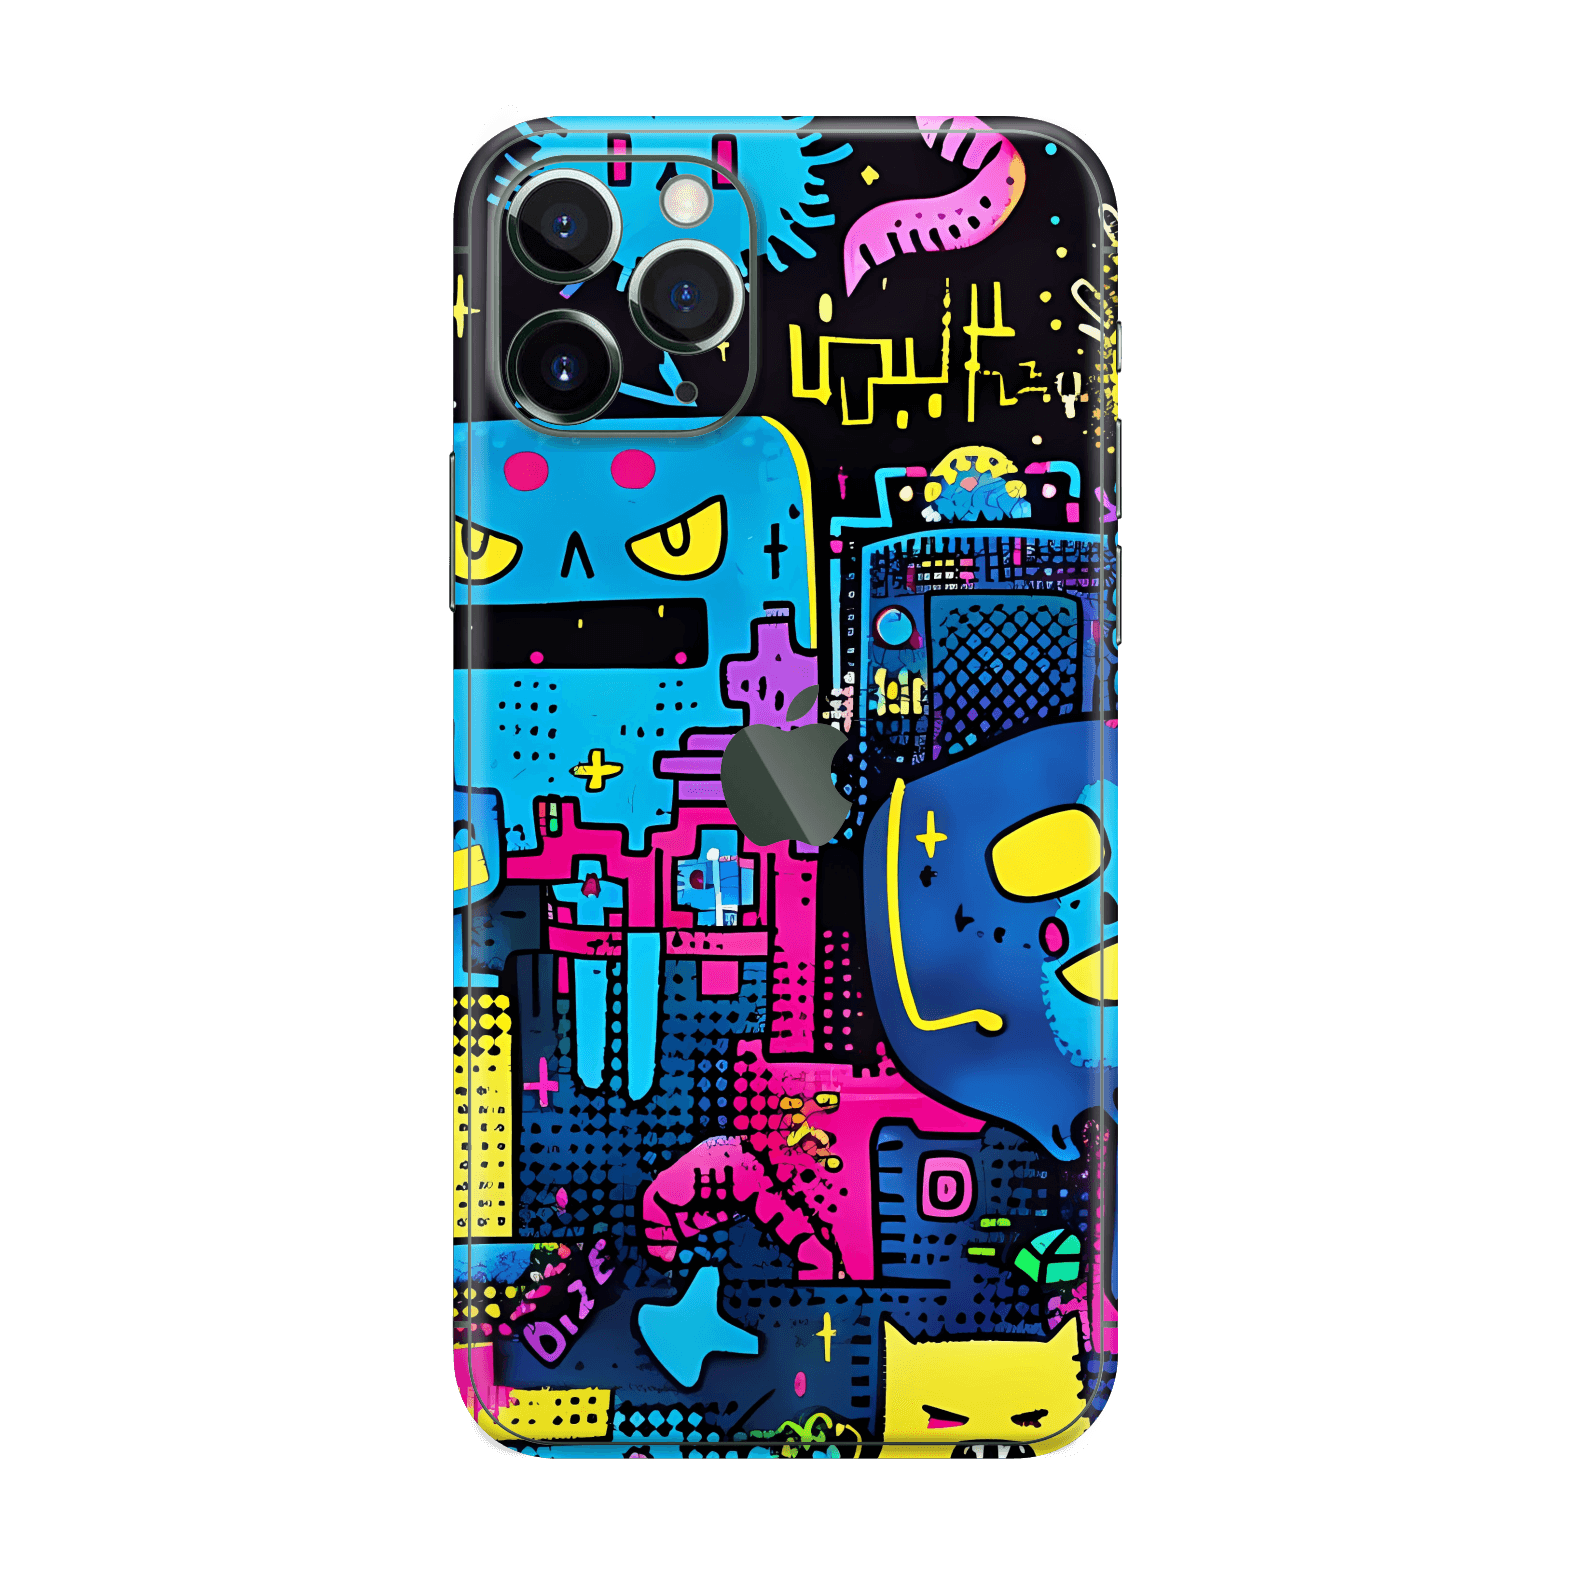 iPhone 11 PRO Print Printed Custom SIGNATURE Arcade Rave Gaming Gamer Pixel Skin Wrap Sticker Decal Cover Protector by QSKINZ | QSKINZ.COM